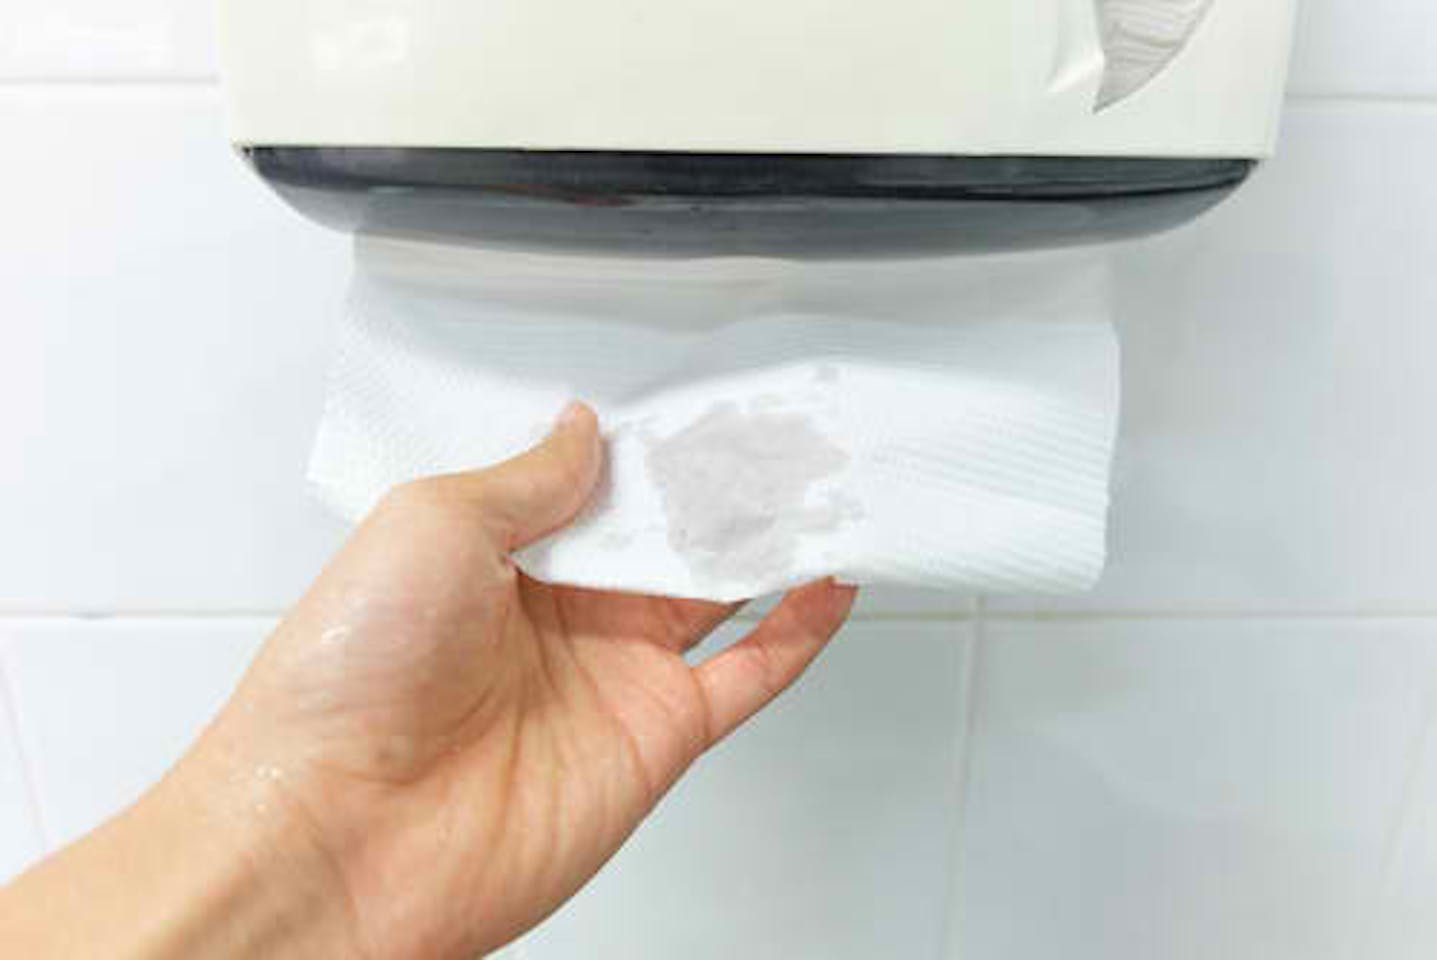 The great bathroom debate: paper towel or hand dryer? | Opinion |  Eco-Business | Asia Pacific